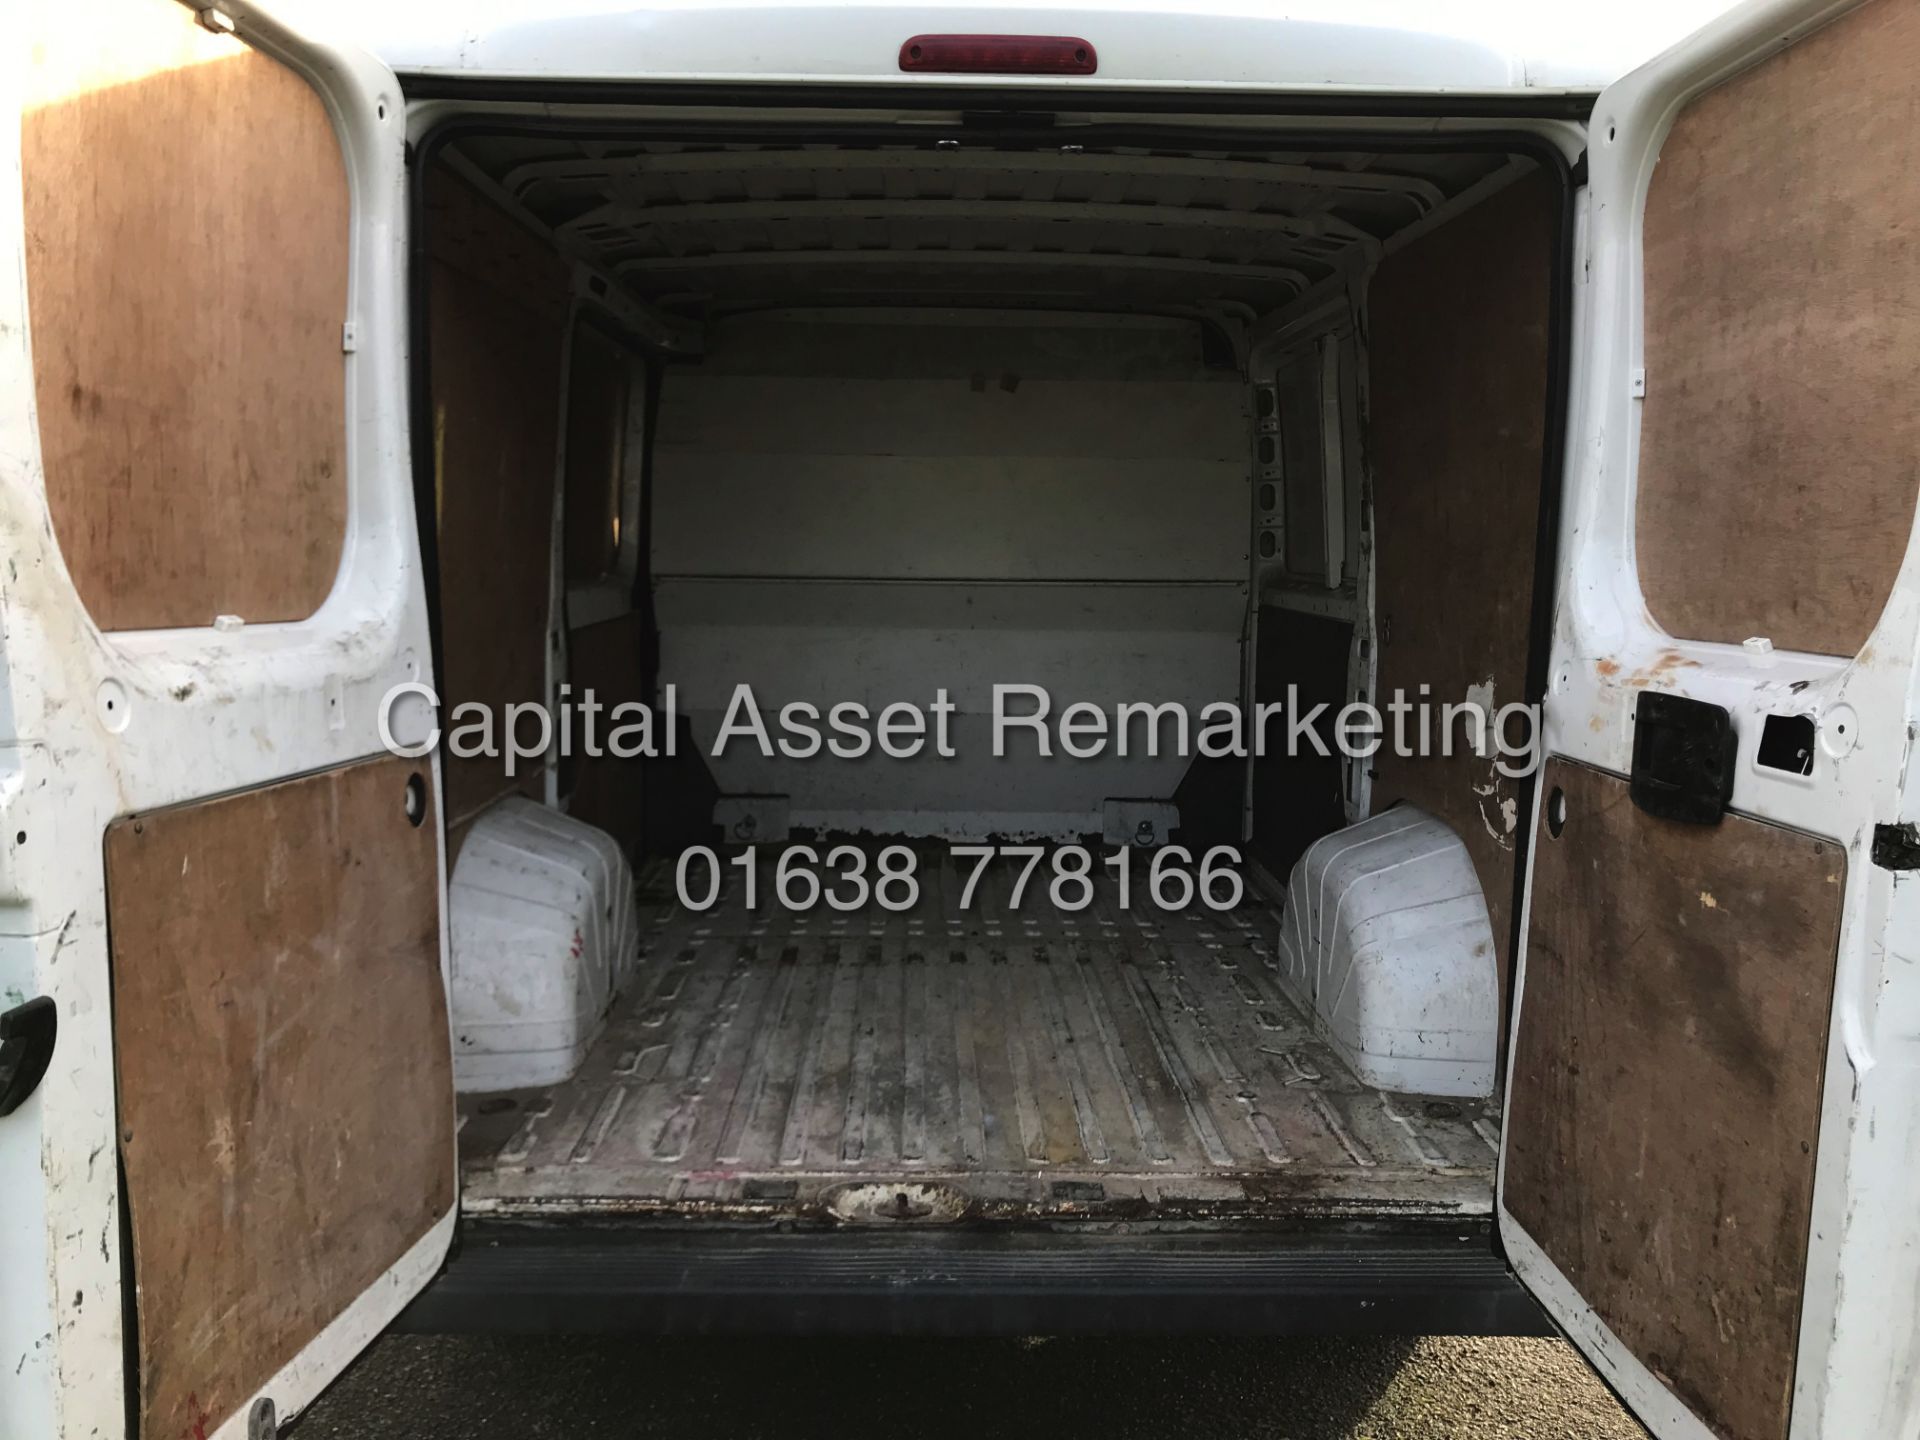 On Sale PEUGEOT BOXER 2.2HDI 330 "120BHP" (2007) 1 OWNER - LOW MILEAGE - LONG MOT - Image 12 of 12